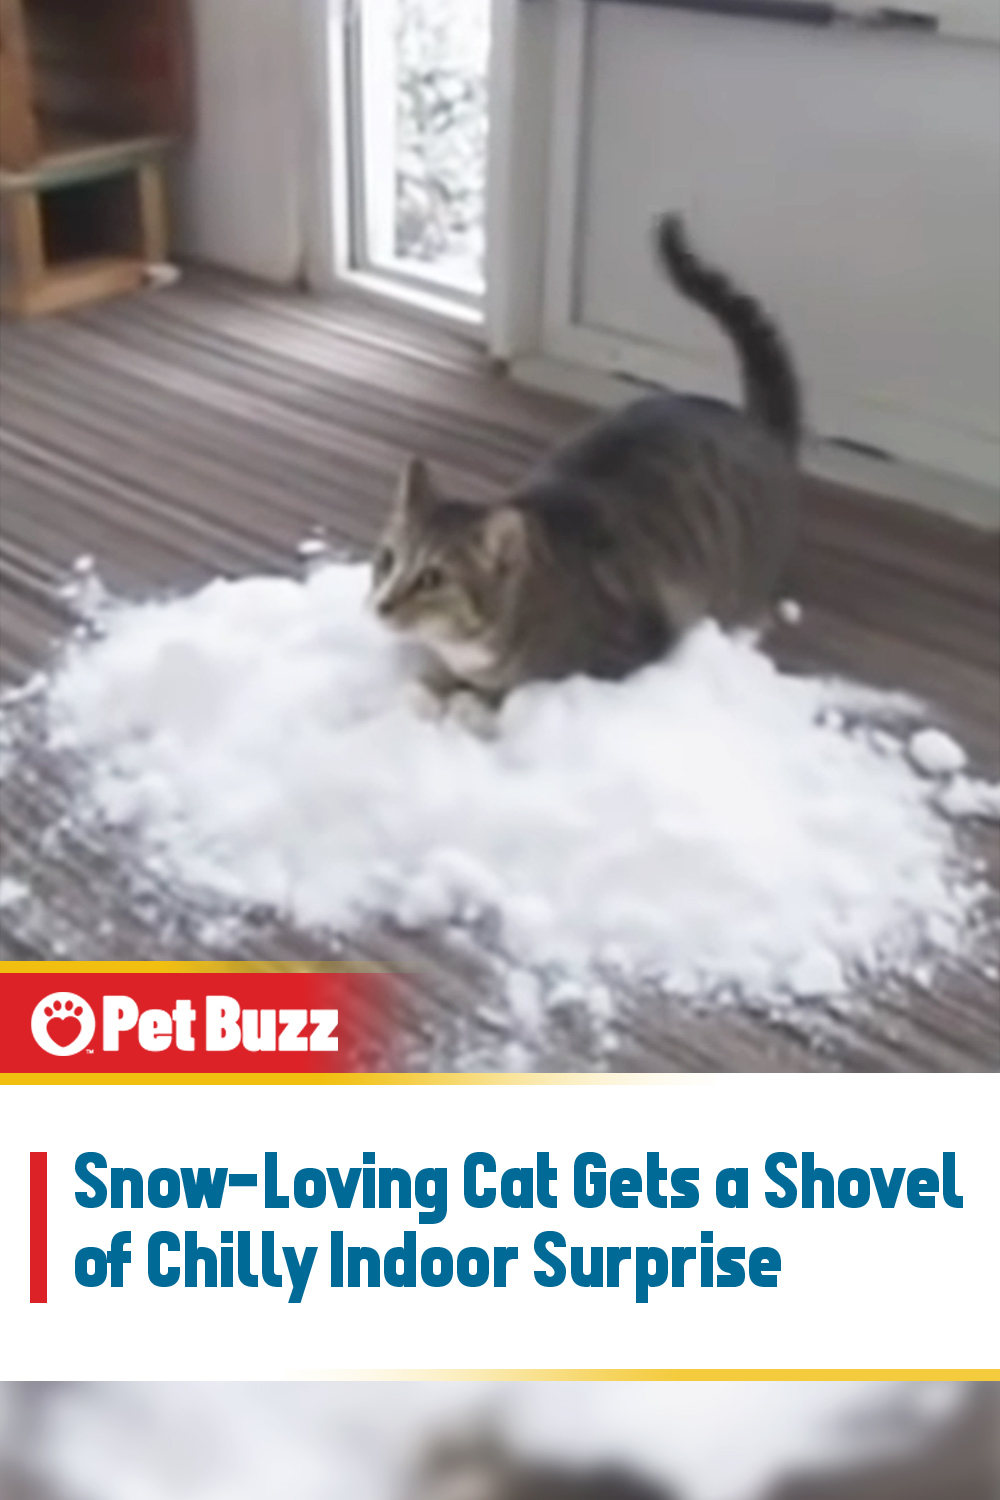 Snow-Loving Cat Gets a Shovel of Chilly Indoor Surprise